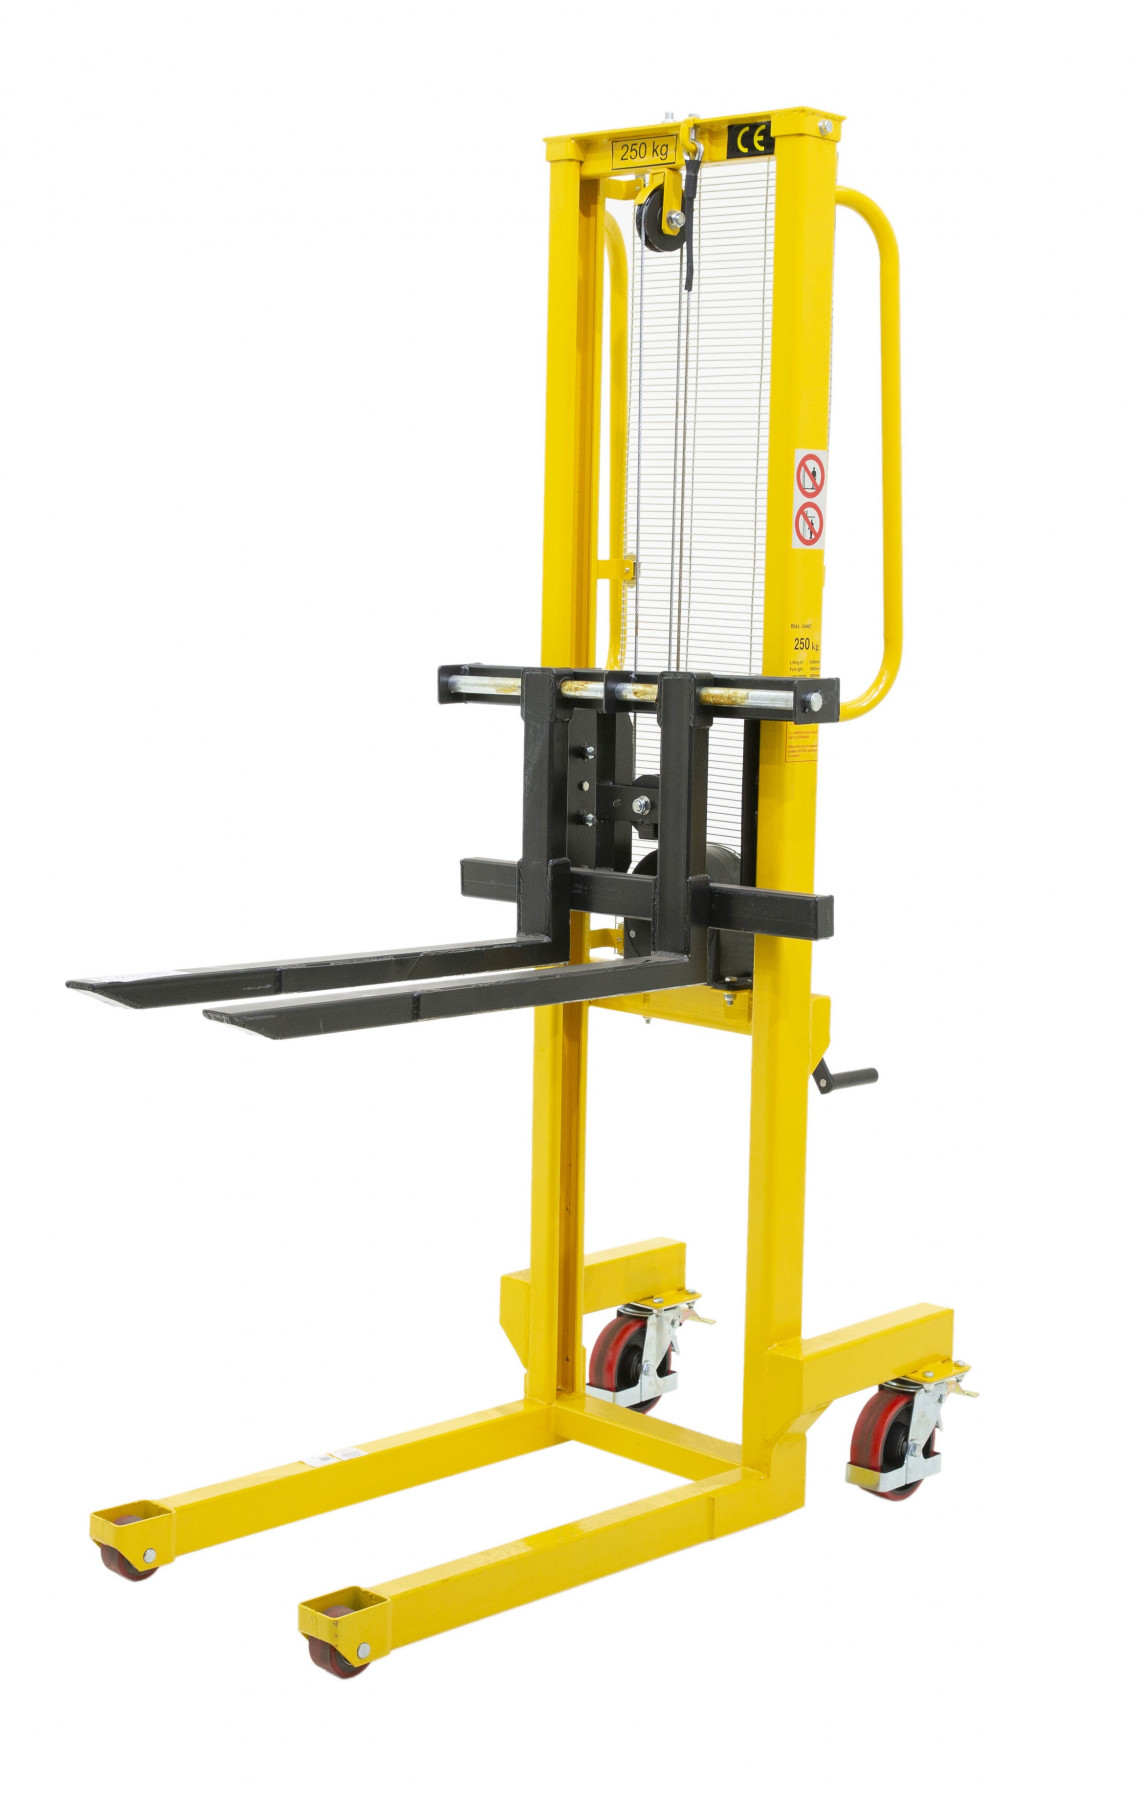 250kg Capacity-1560mm Lift Height